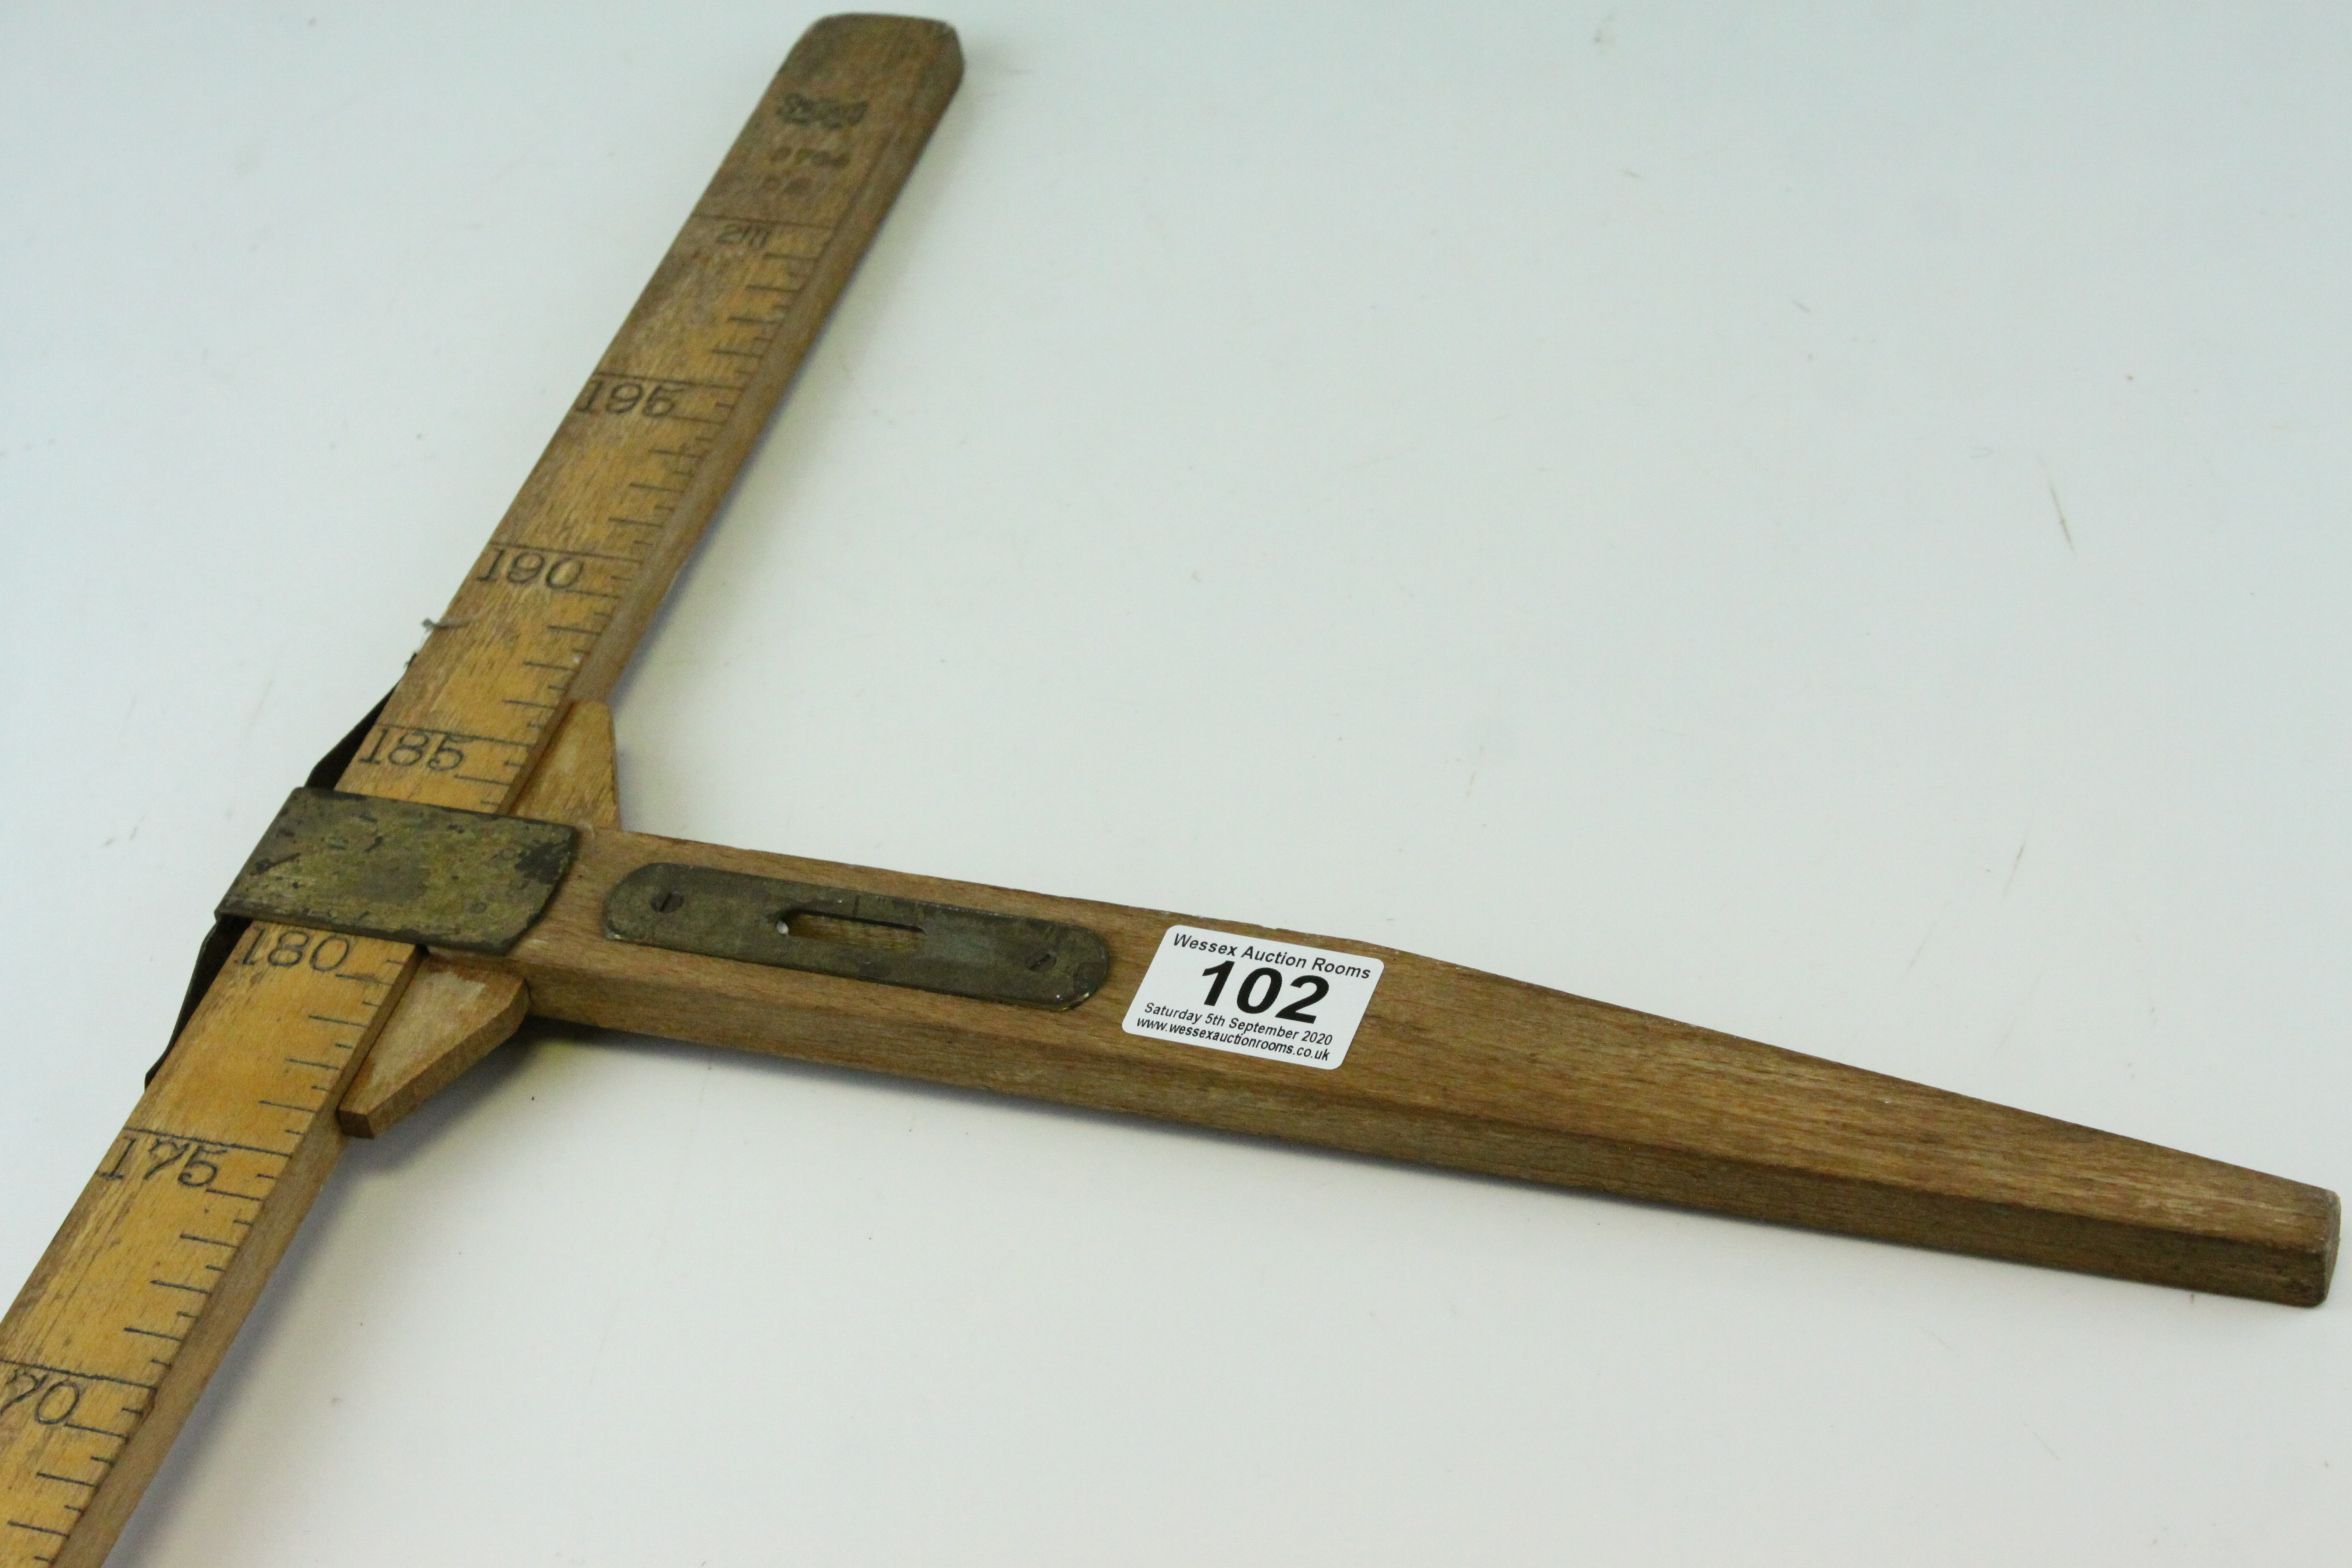 Early to Mid 20th century ' Smallwood ' Wooden Horse Measure with inset Spirit Level, measuring up - Image 2 of 2